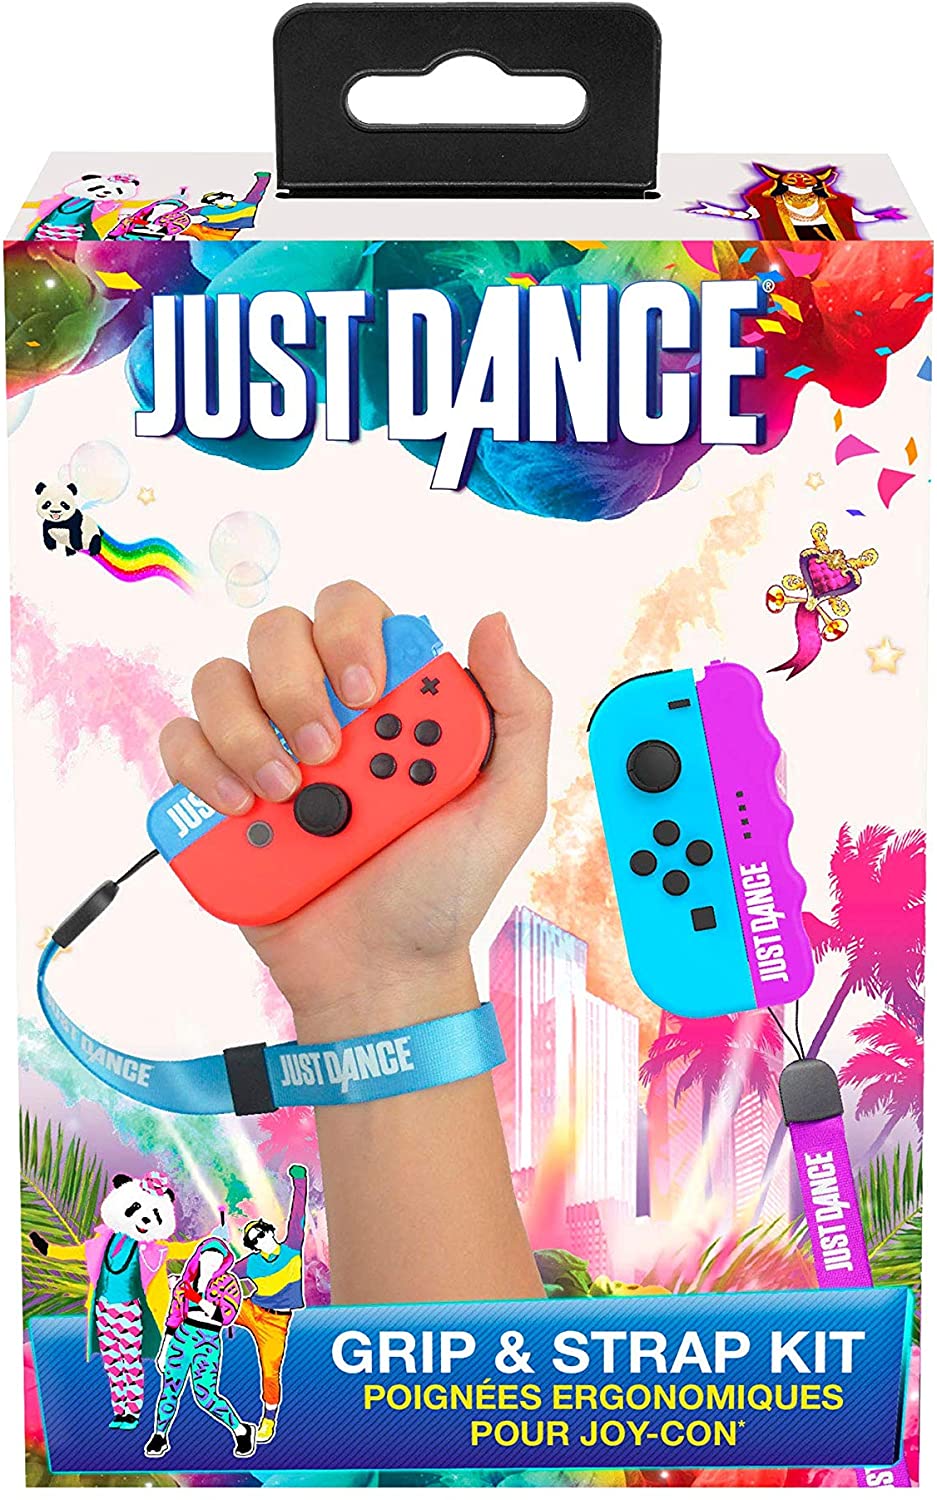 Orzly | Adjustable Joy-Con Wrist Bands for Nintendo Switch Just Dance